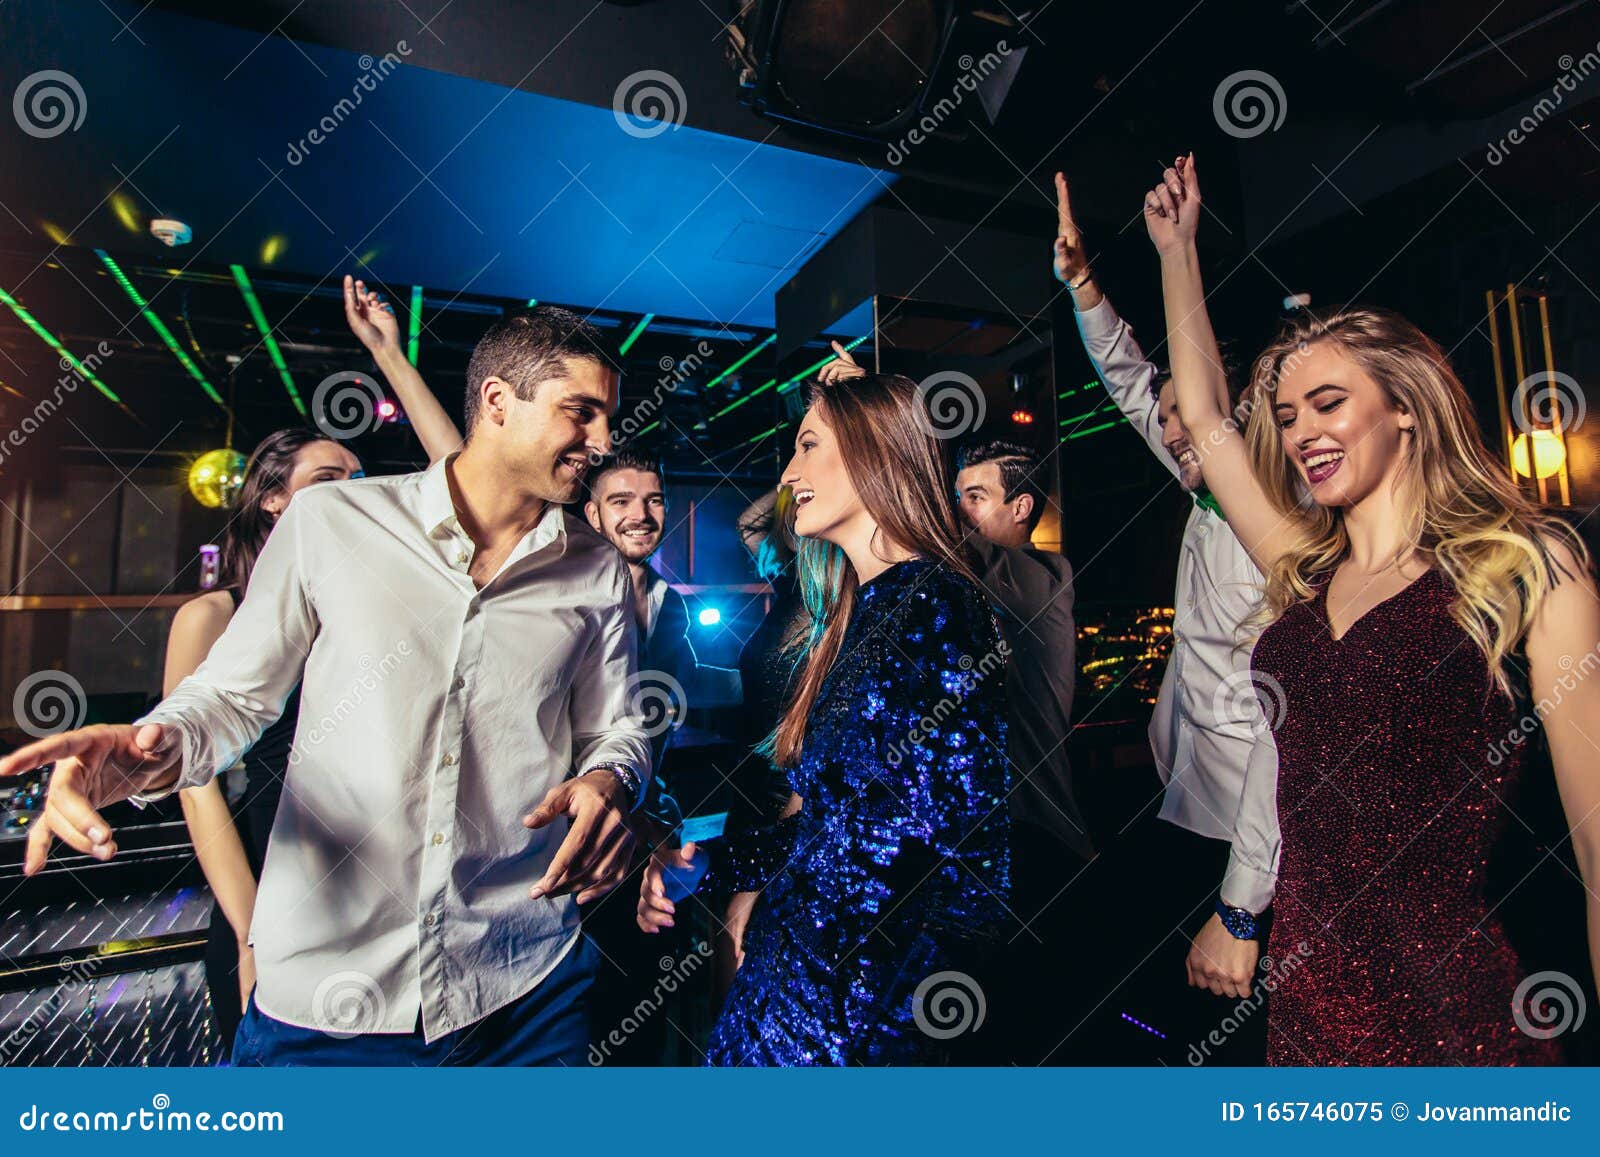 Young People Dancing in Night Club Stock Image - Image of night, design ...